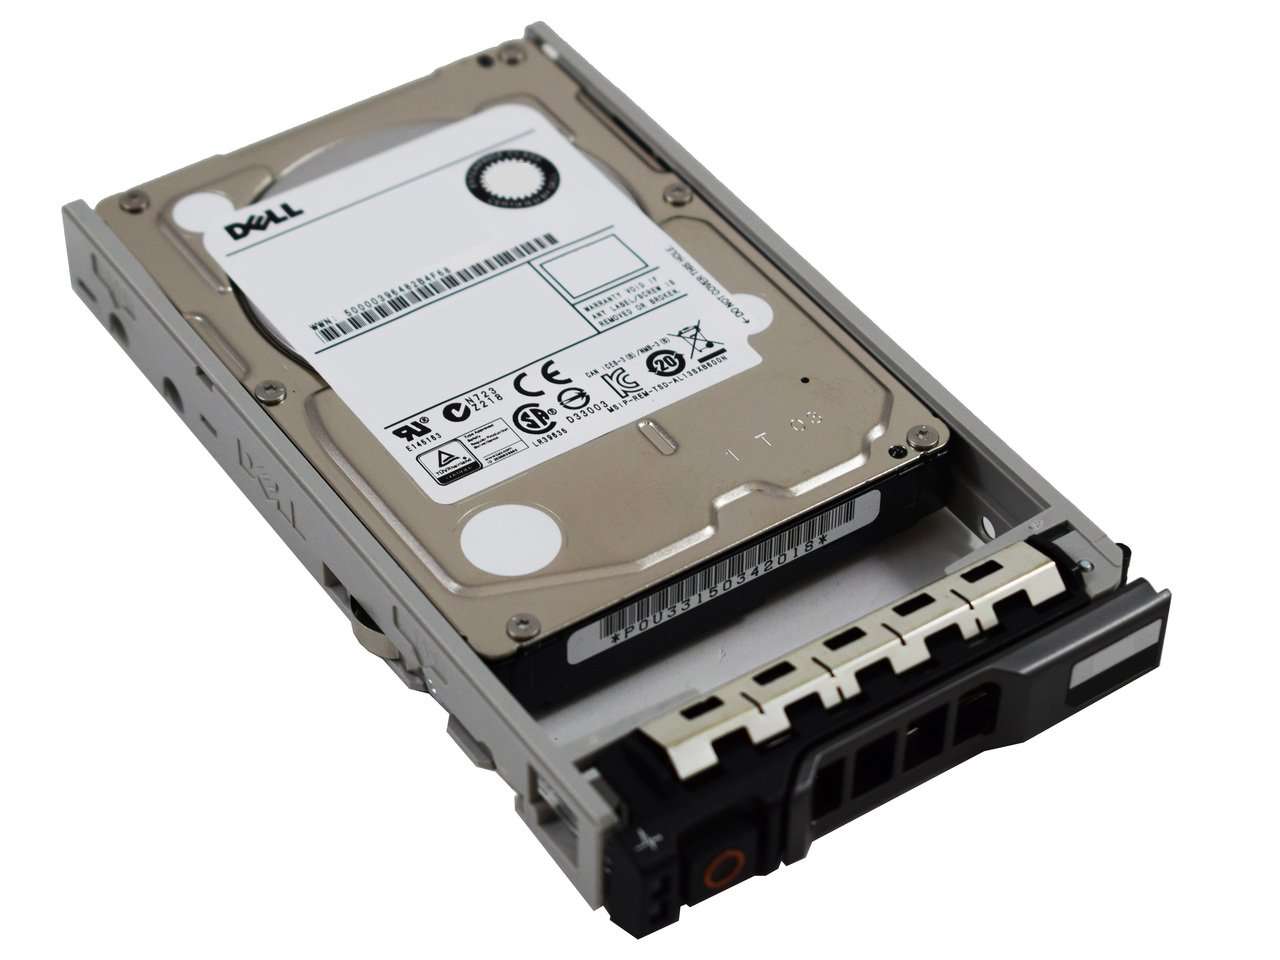 Dell G13 342-0856 600GB 10K RPM SAS 6Gb/s 512n 2.5" Manufacturer Recertified HDD